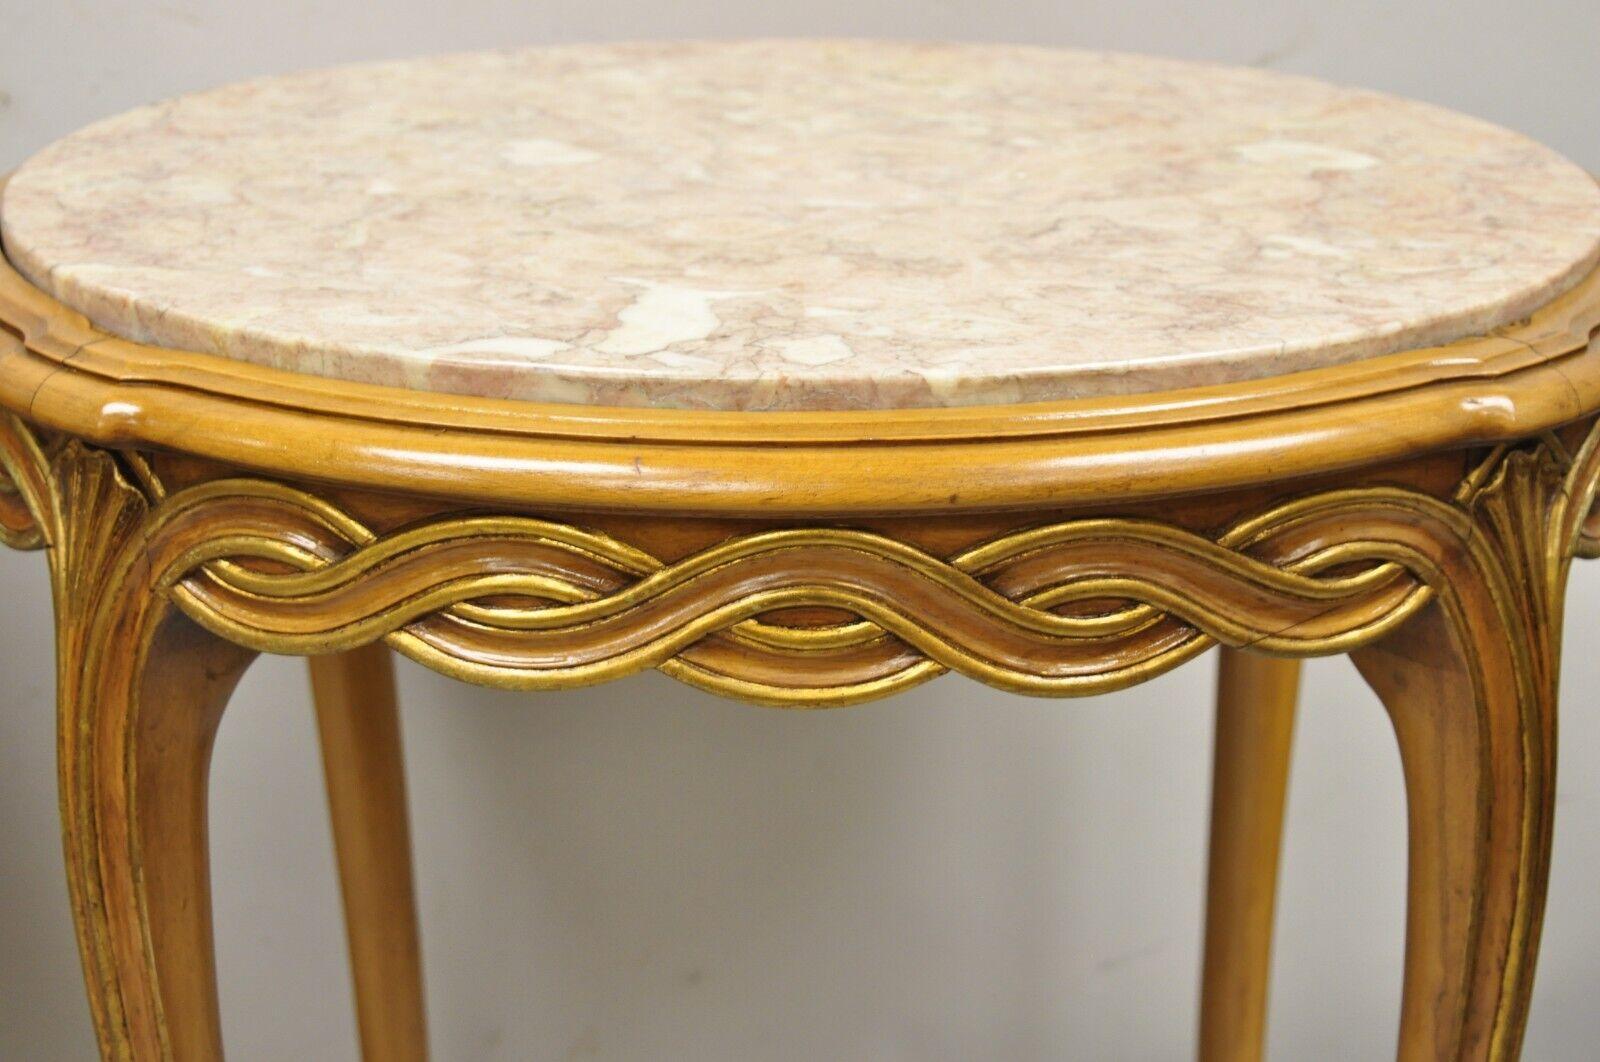 20th Century French Provincial Hollywood Regency Round Pink Marble Top Side Tables, a Pair For Sale